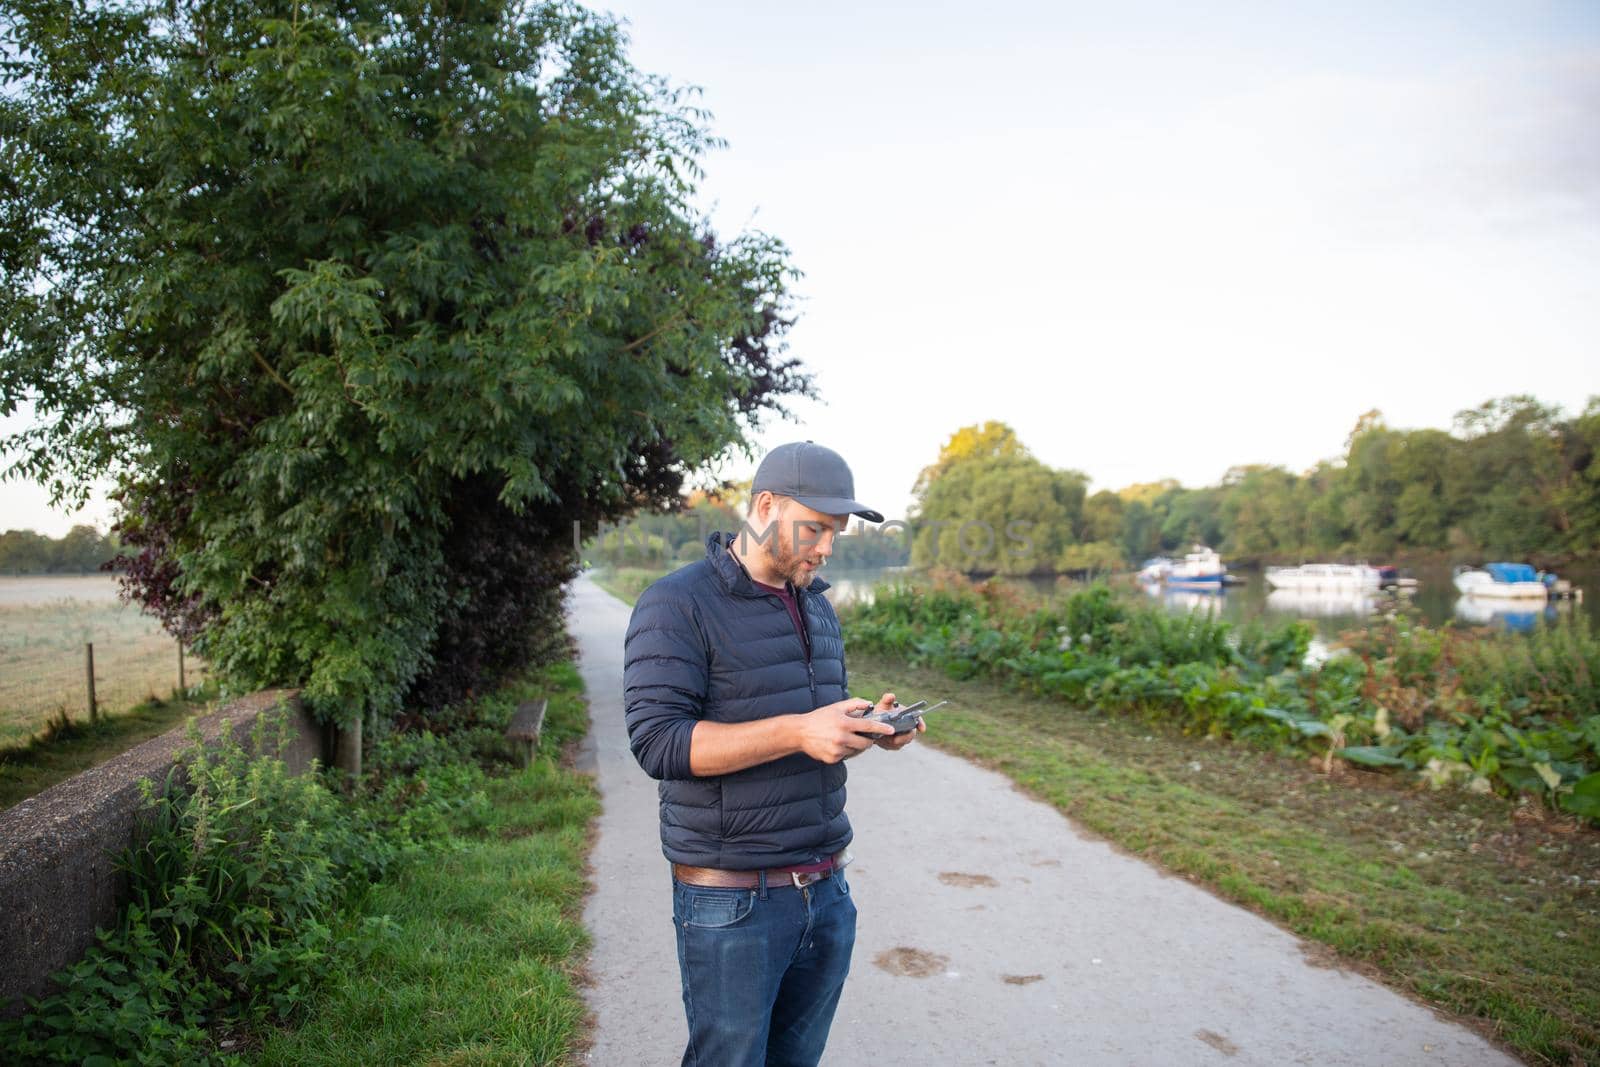 Concentrated man standing on path holding remote control in park. Man in park with trees and boats on lake as background. People interacting with technology outside